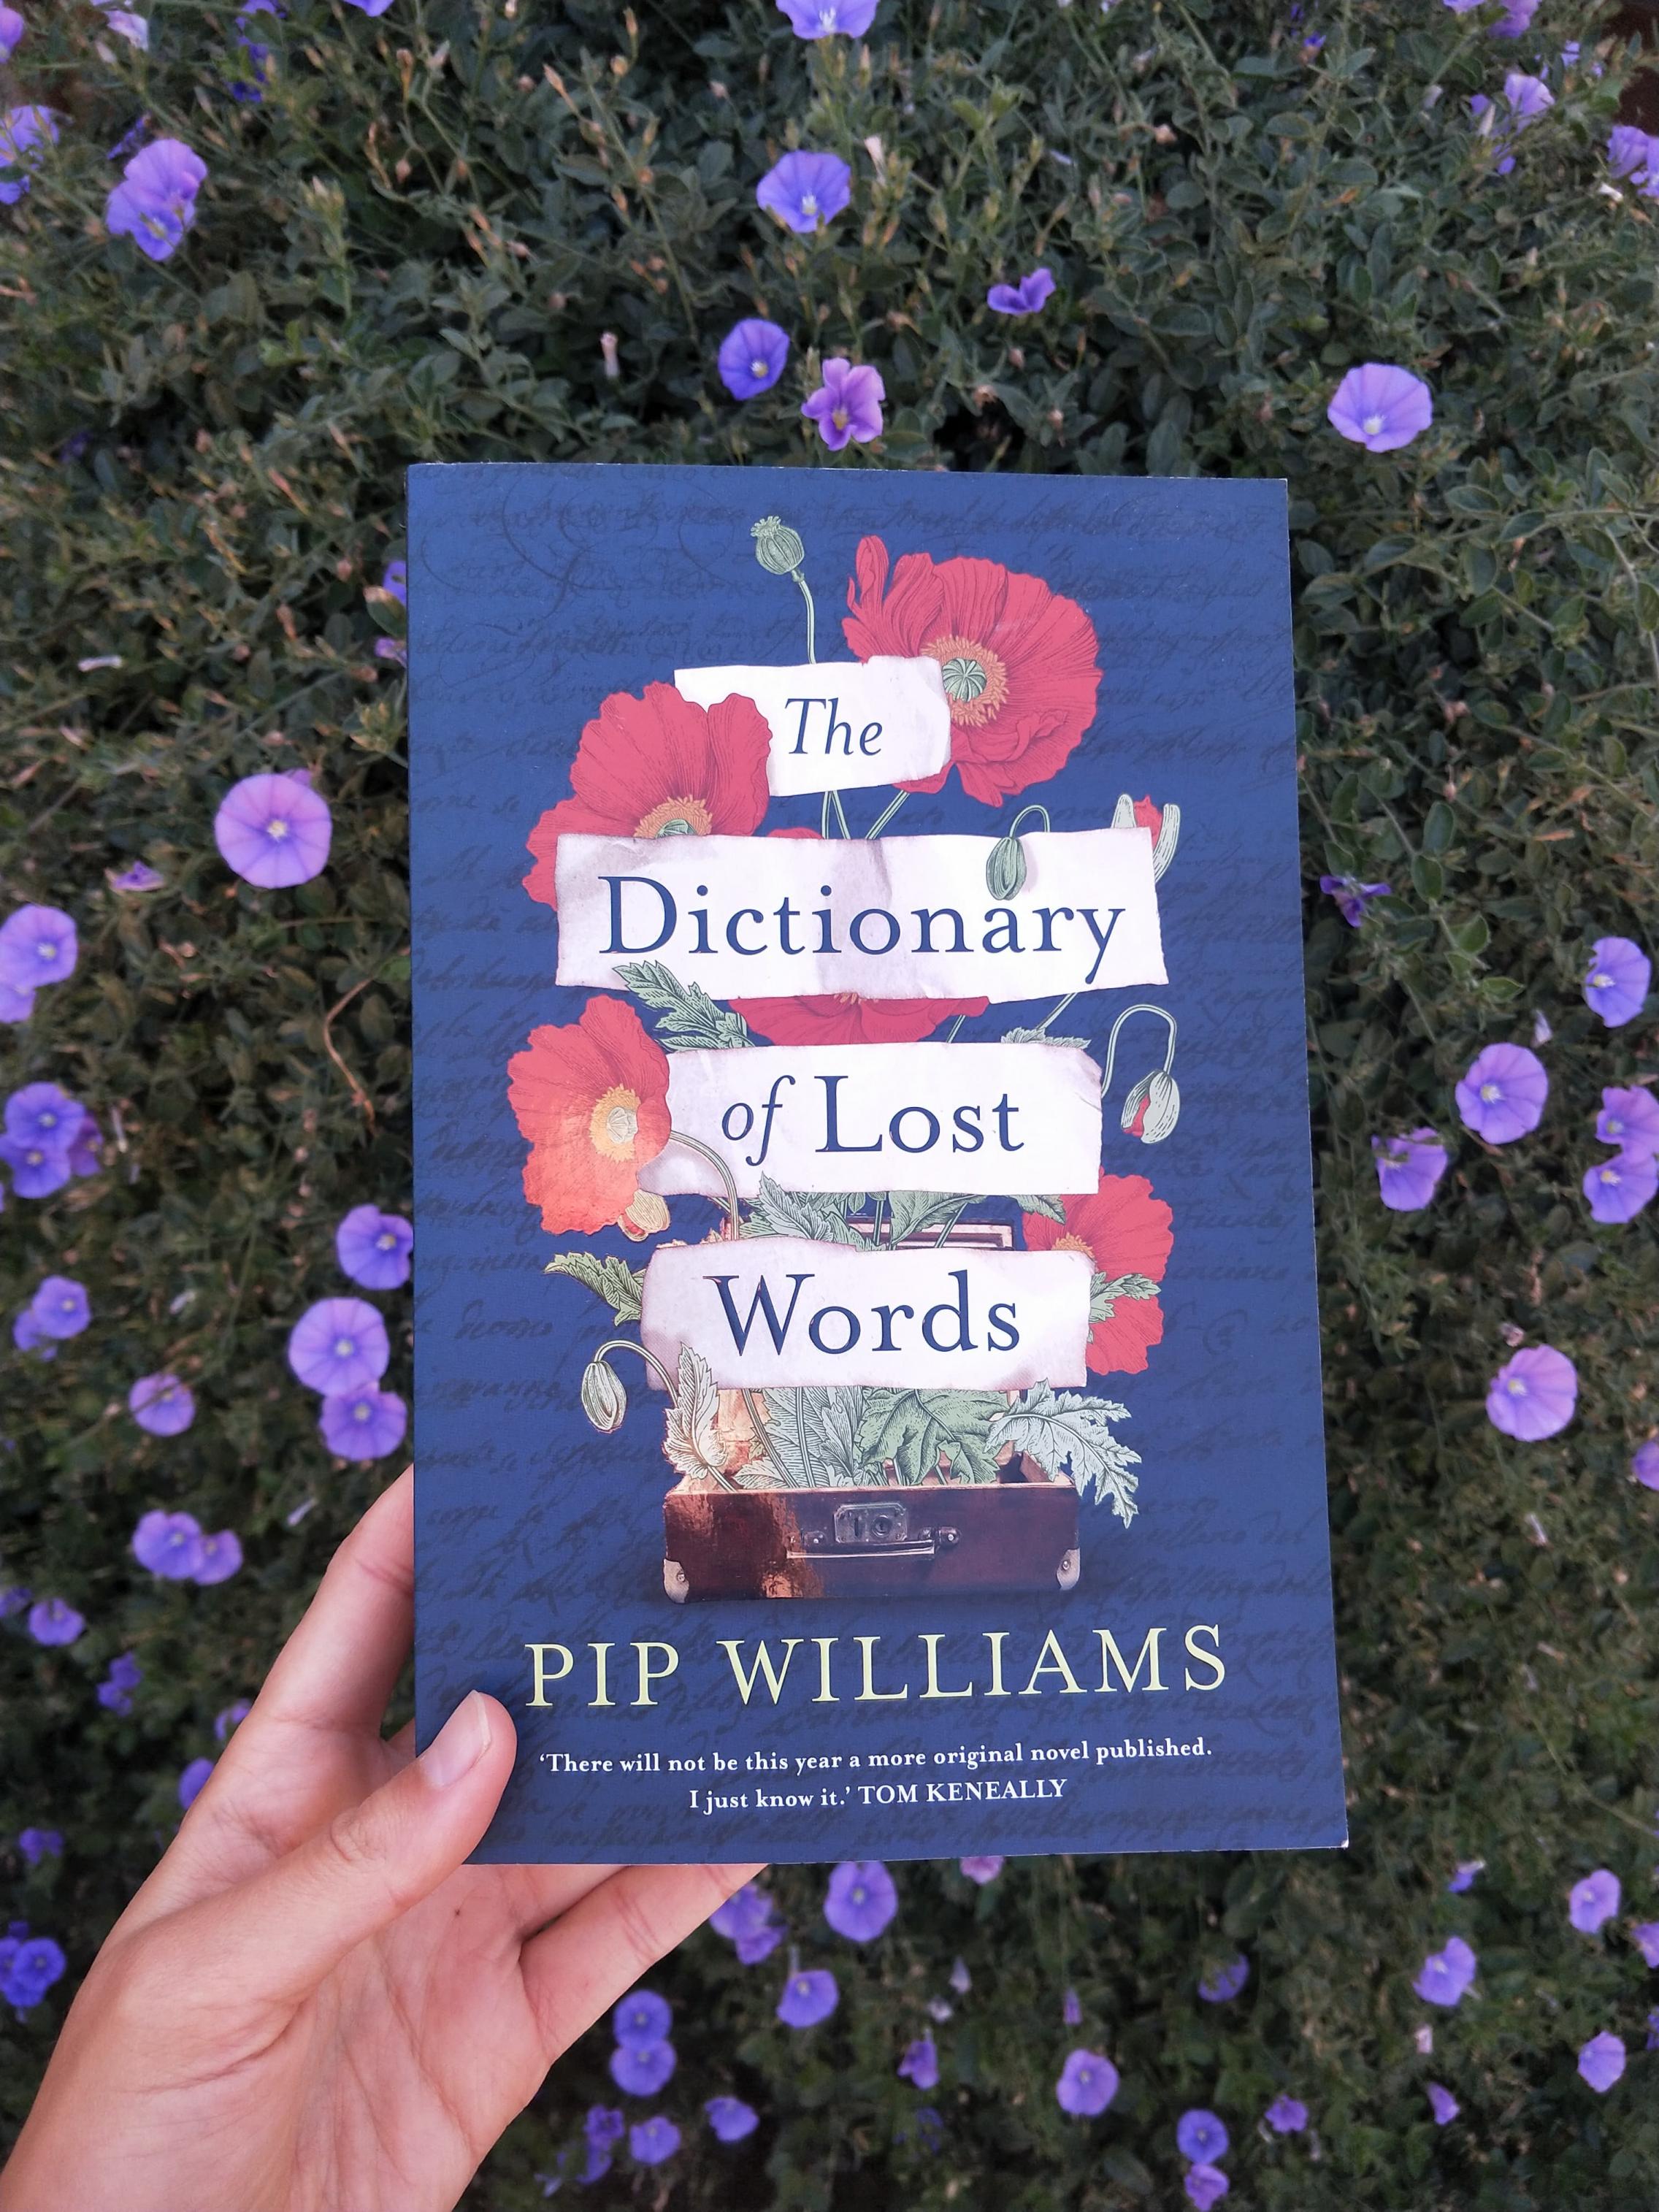 The cover of a book which says 'The Dictionary of Lost Words - Pip Williams' 